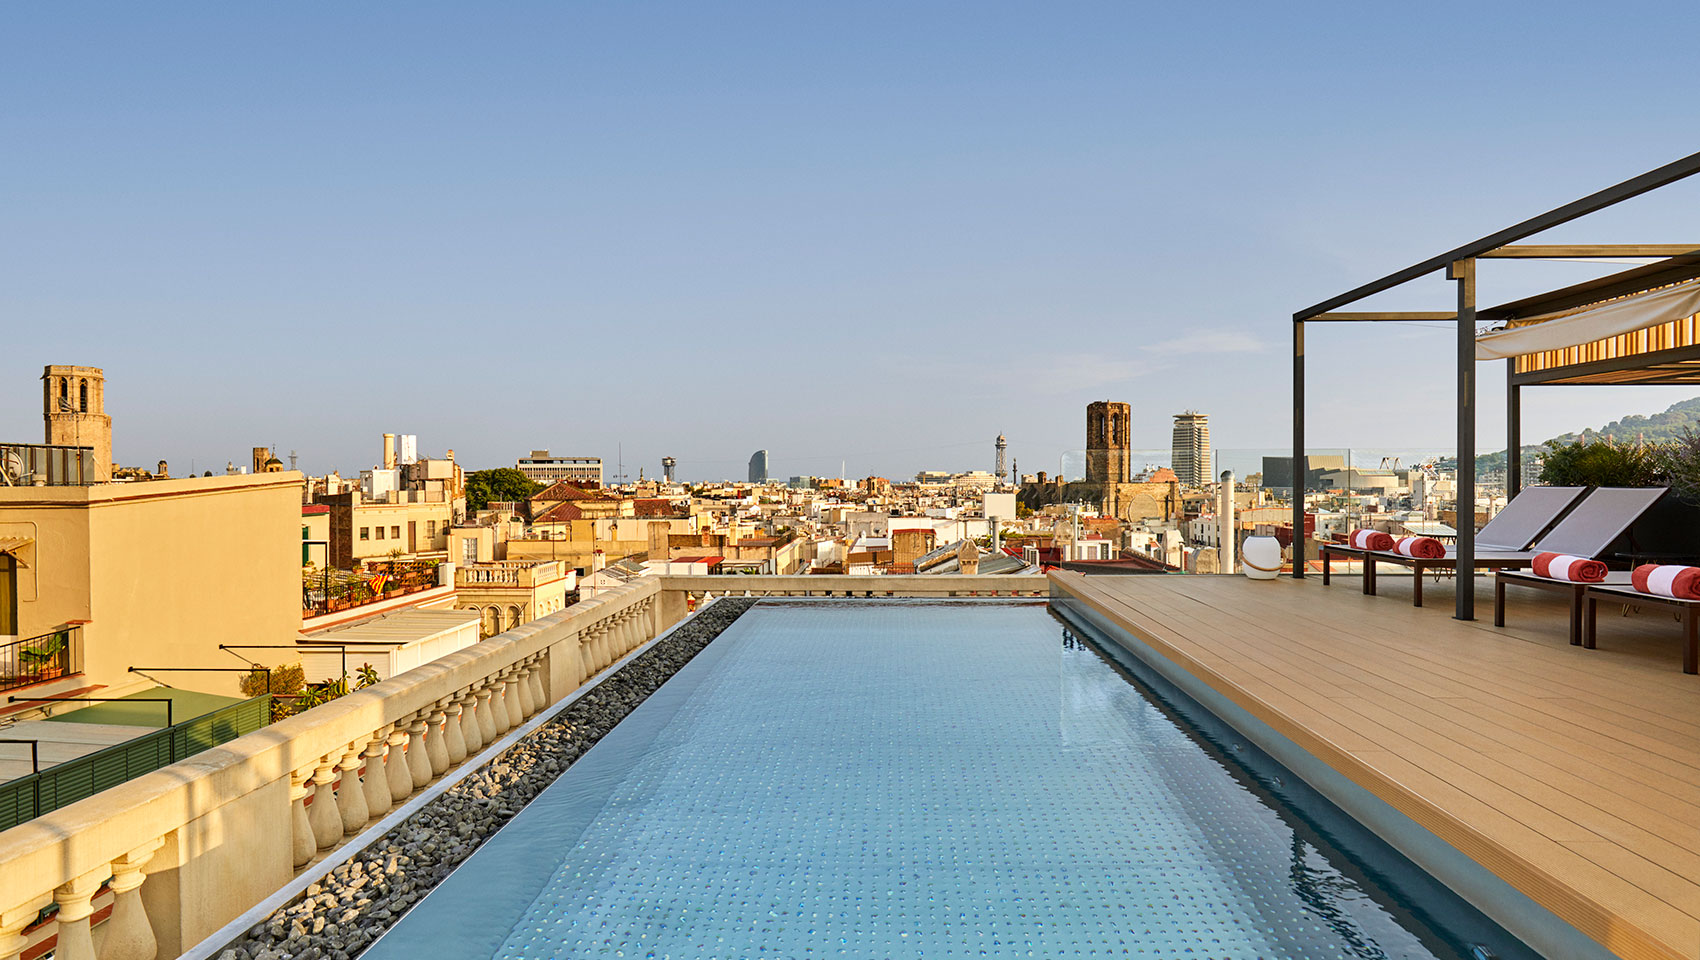 Experience the authentic Barcelona from our pool